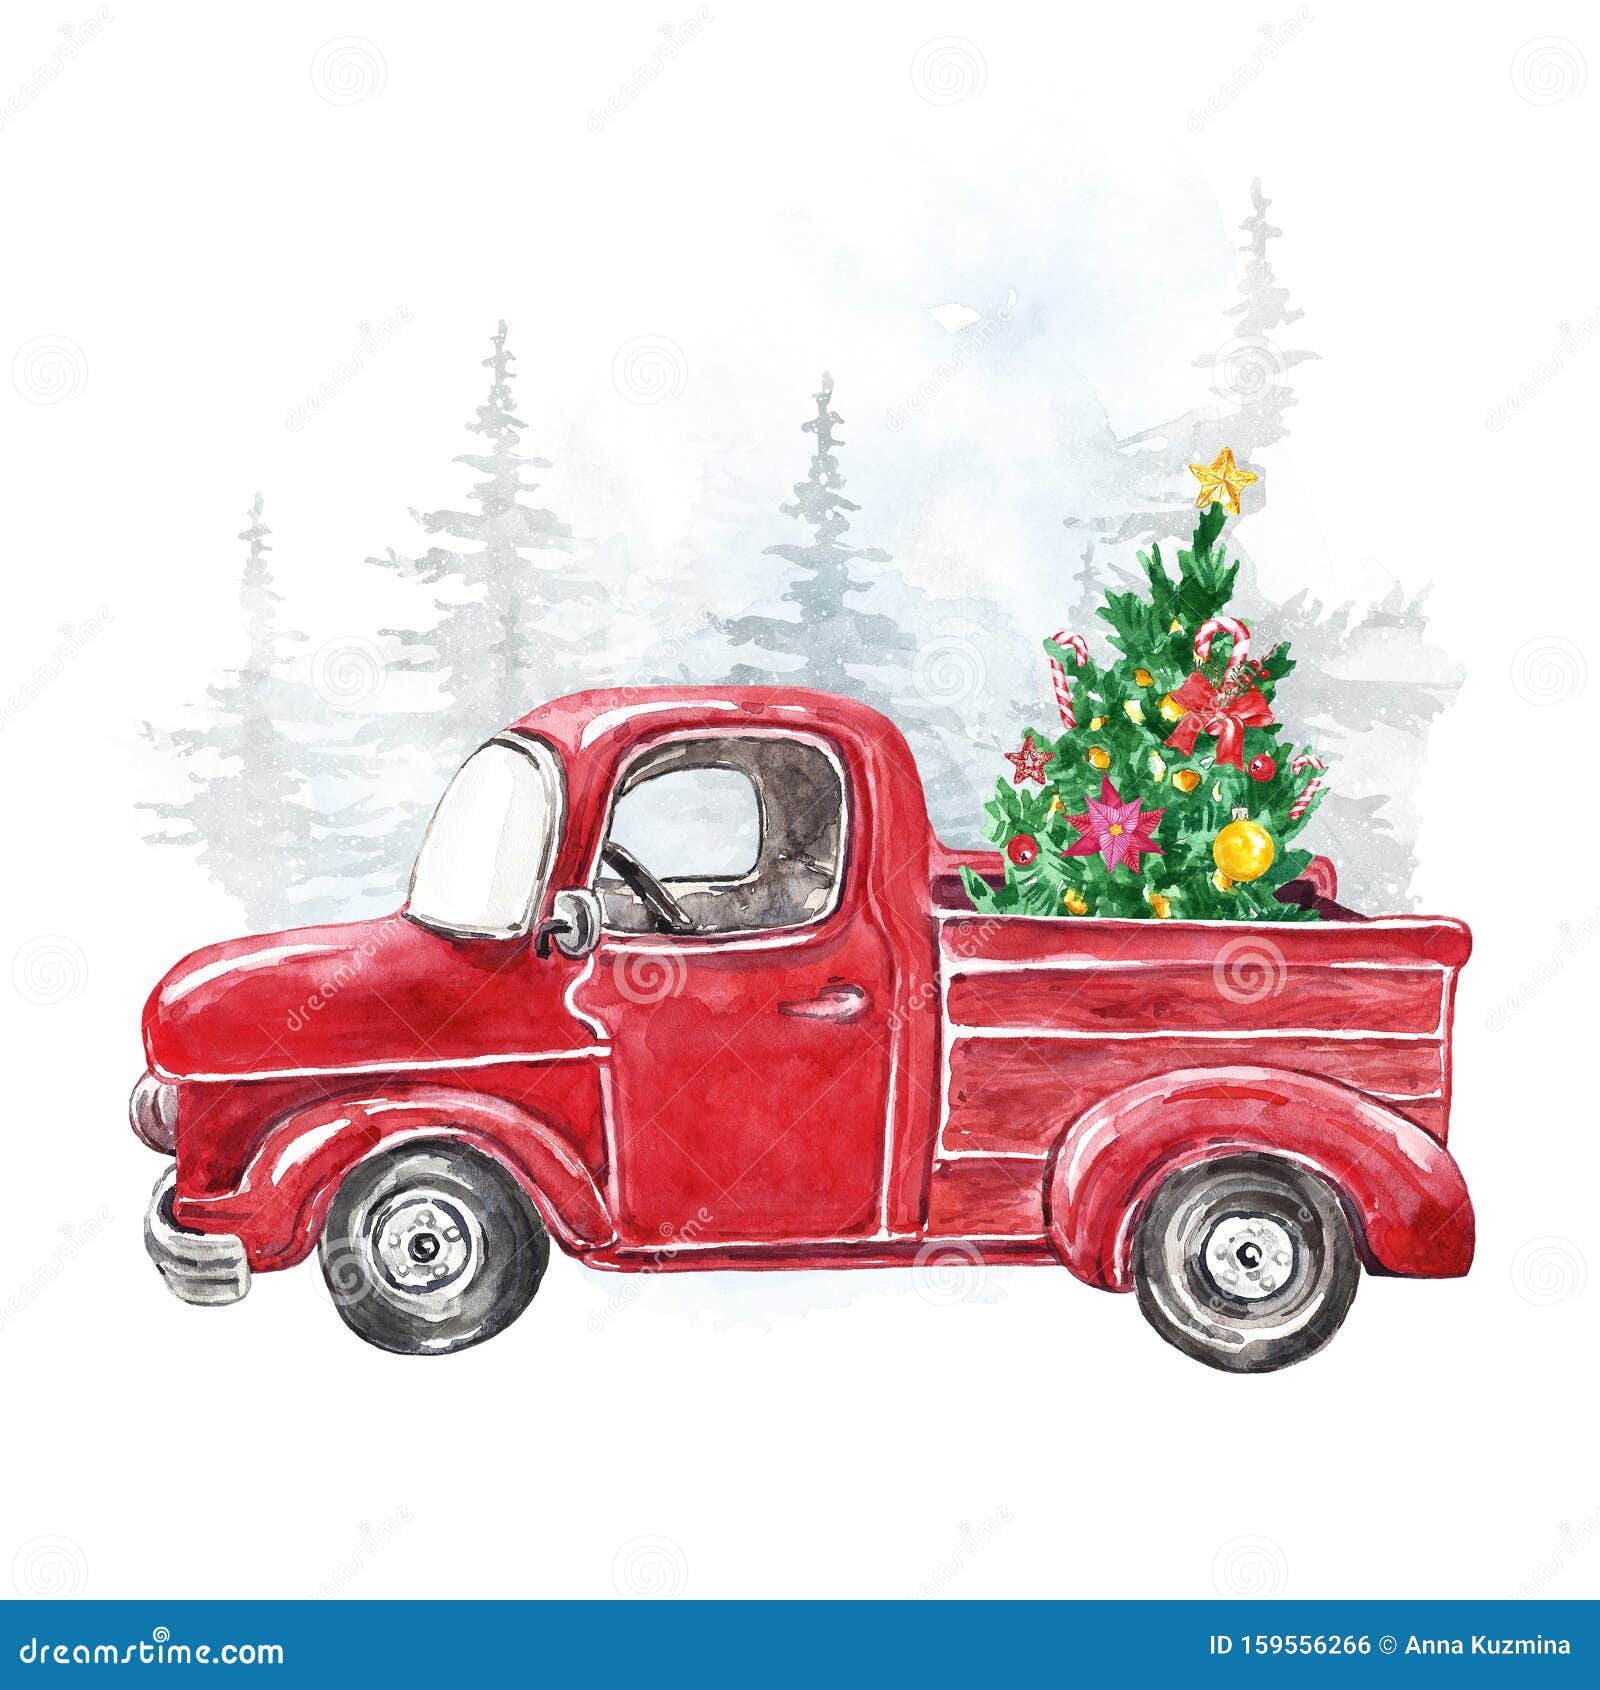 Watercolor Christmas Card Template With Hand Painted Abstract Retro Truck And Fir Tree Winter Snowy Forest Illustration Stock Photo Image Of Drawing Card 159556266